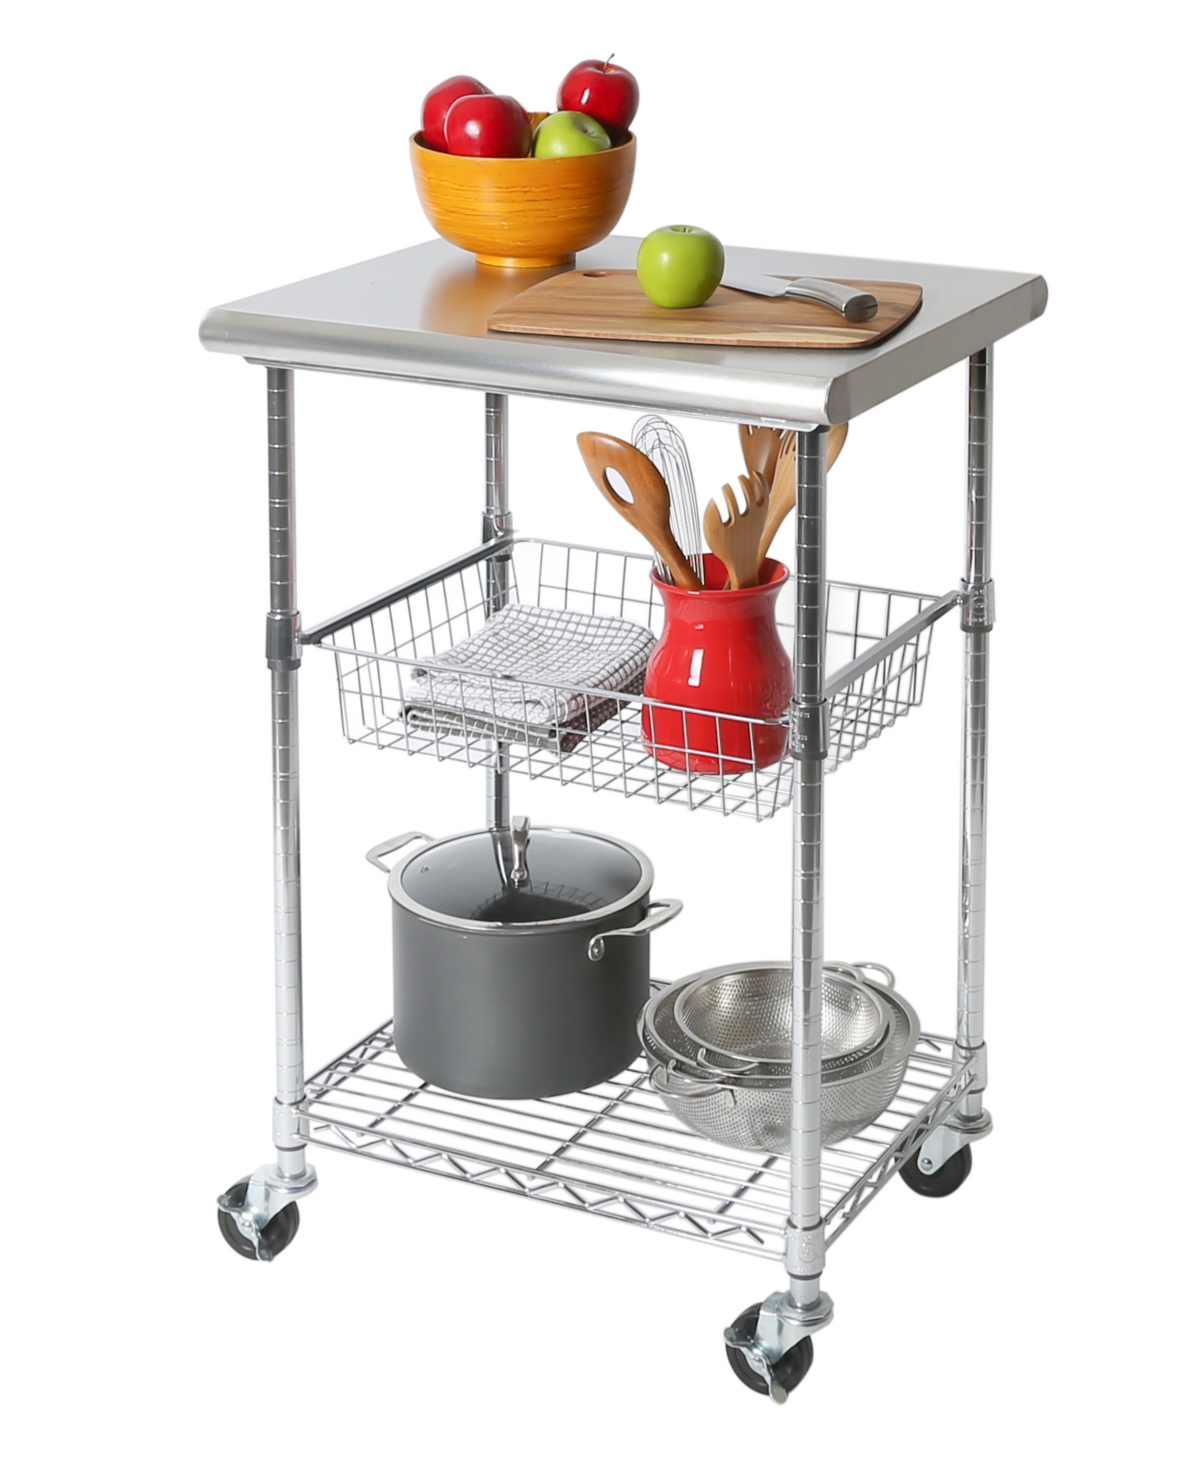 Nsf Stainless Steel Kitchen Work Table Cart - Silver